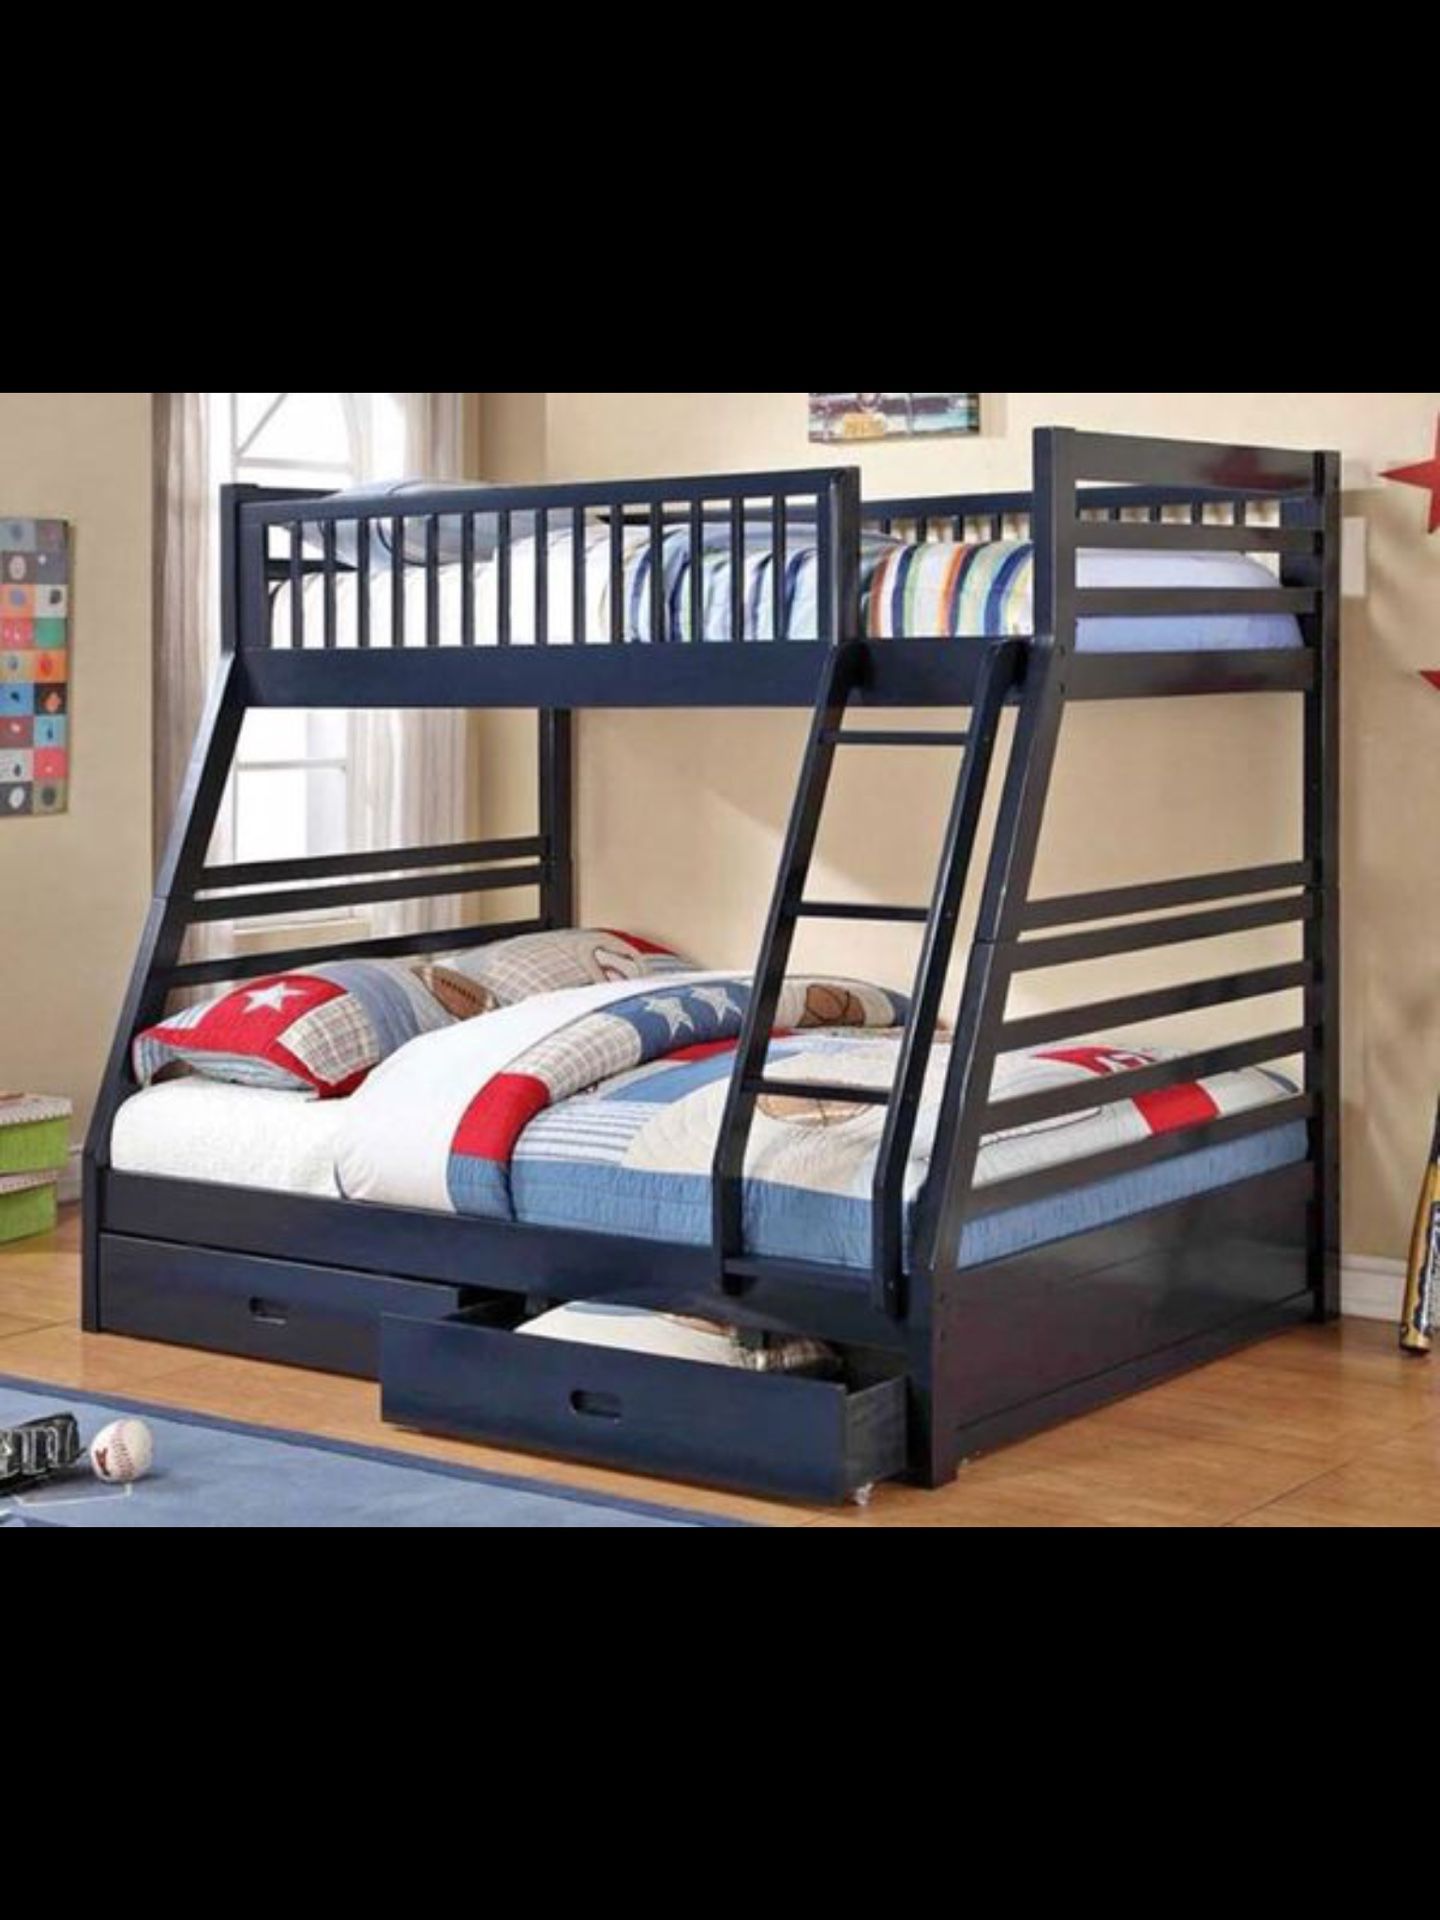 Brand new bunk bed